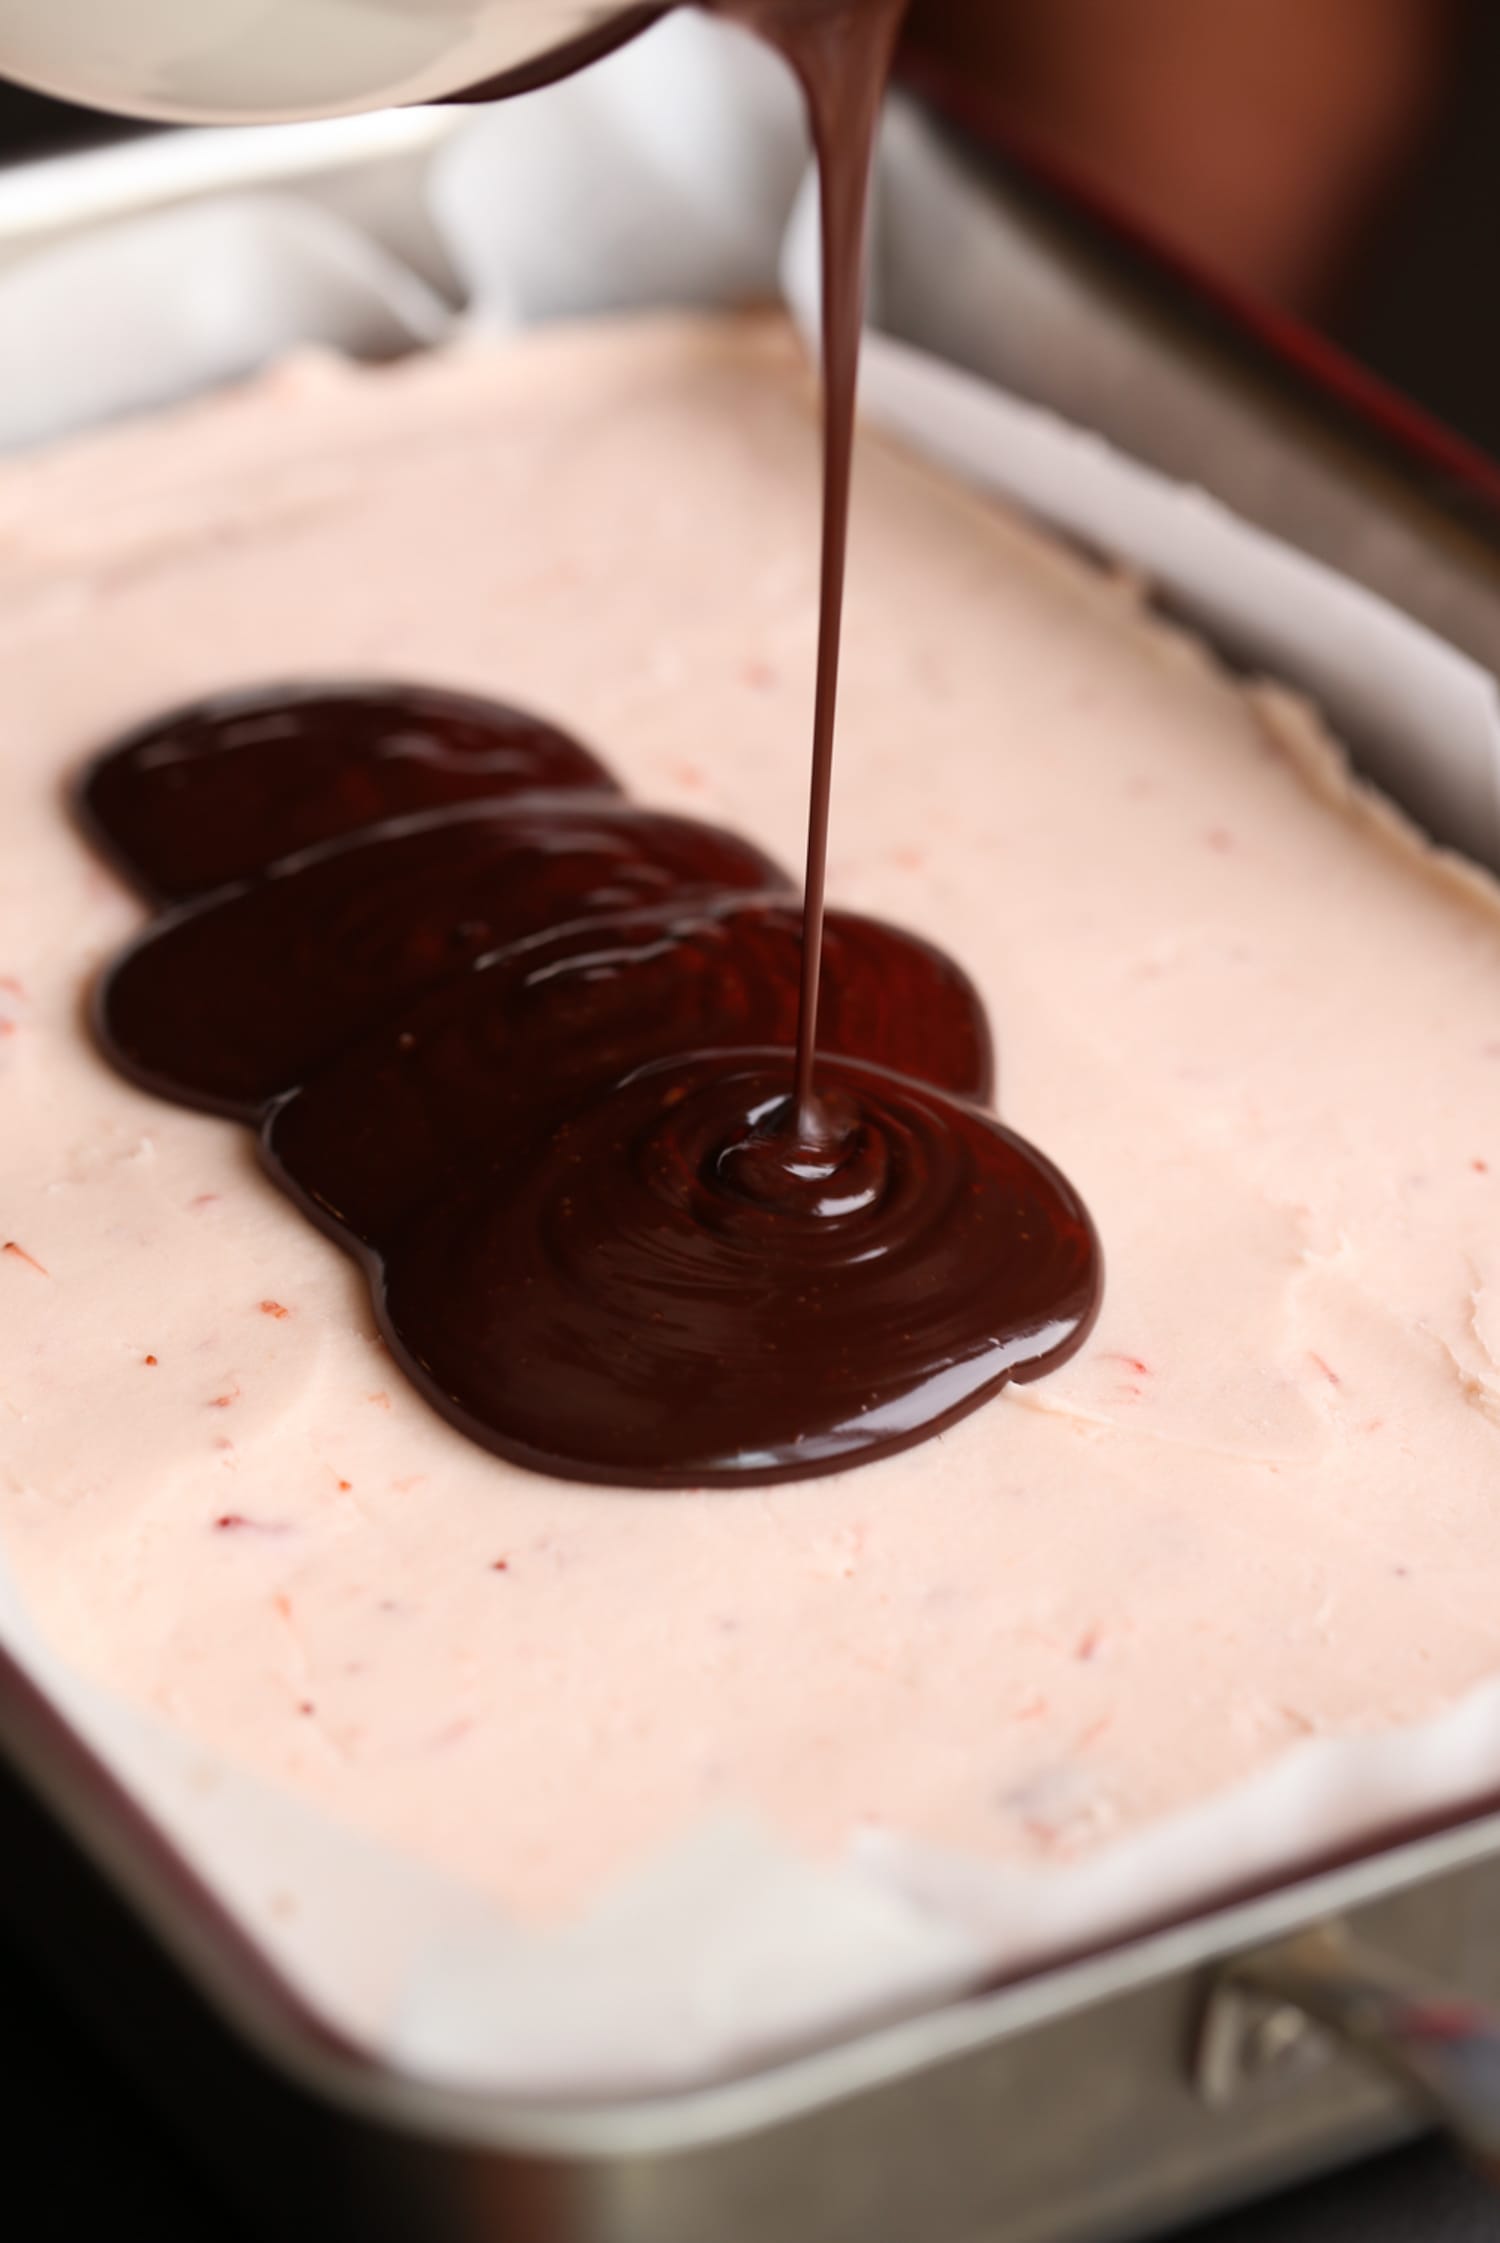 Pour the chocolate ganache over the strawberry buttercream in a 9x13 mold.